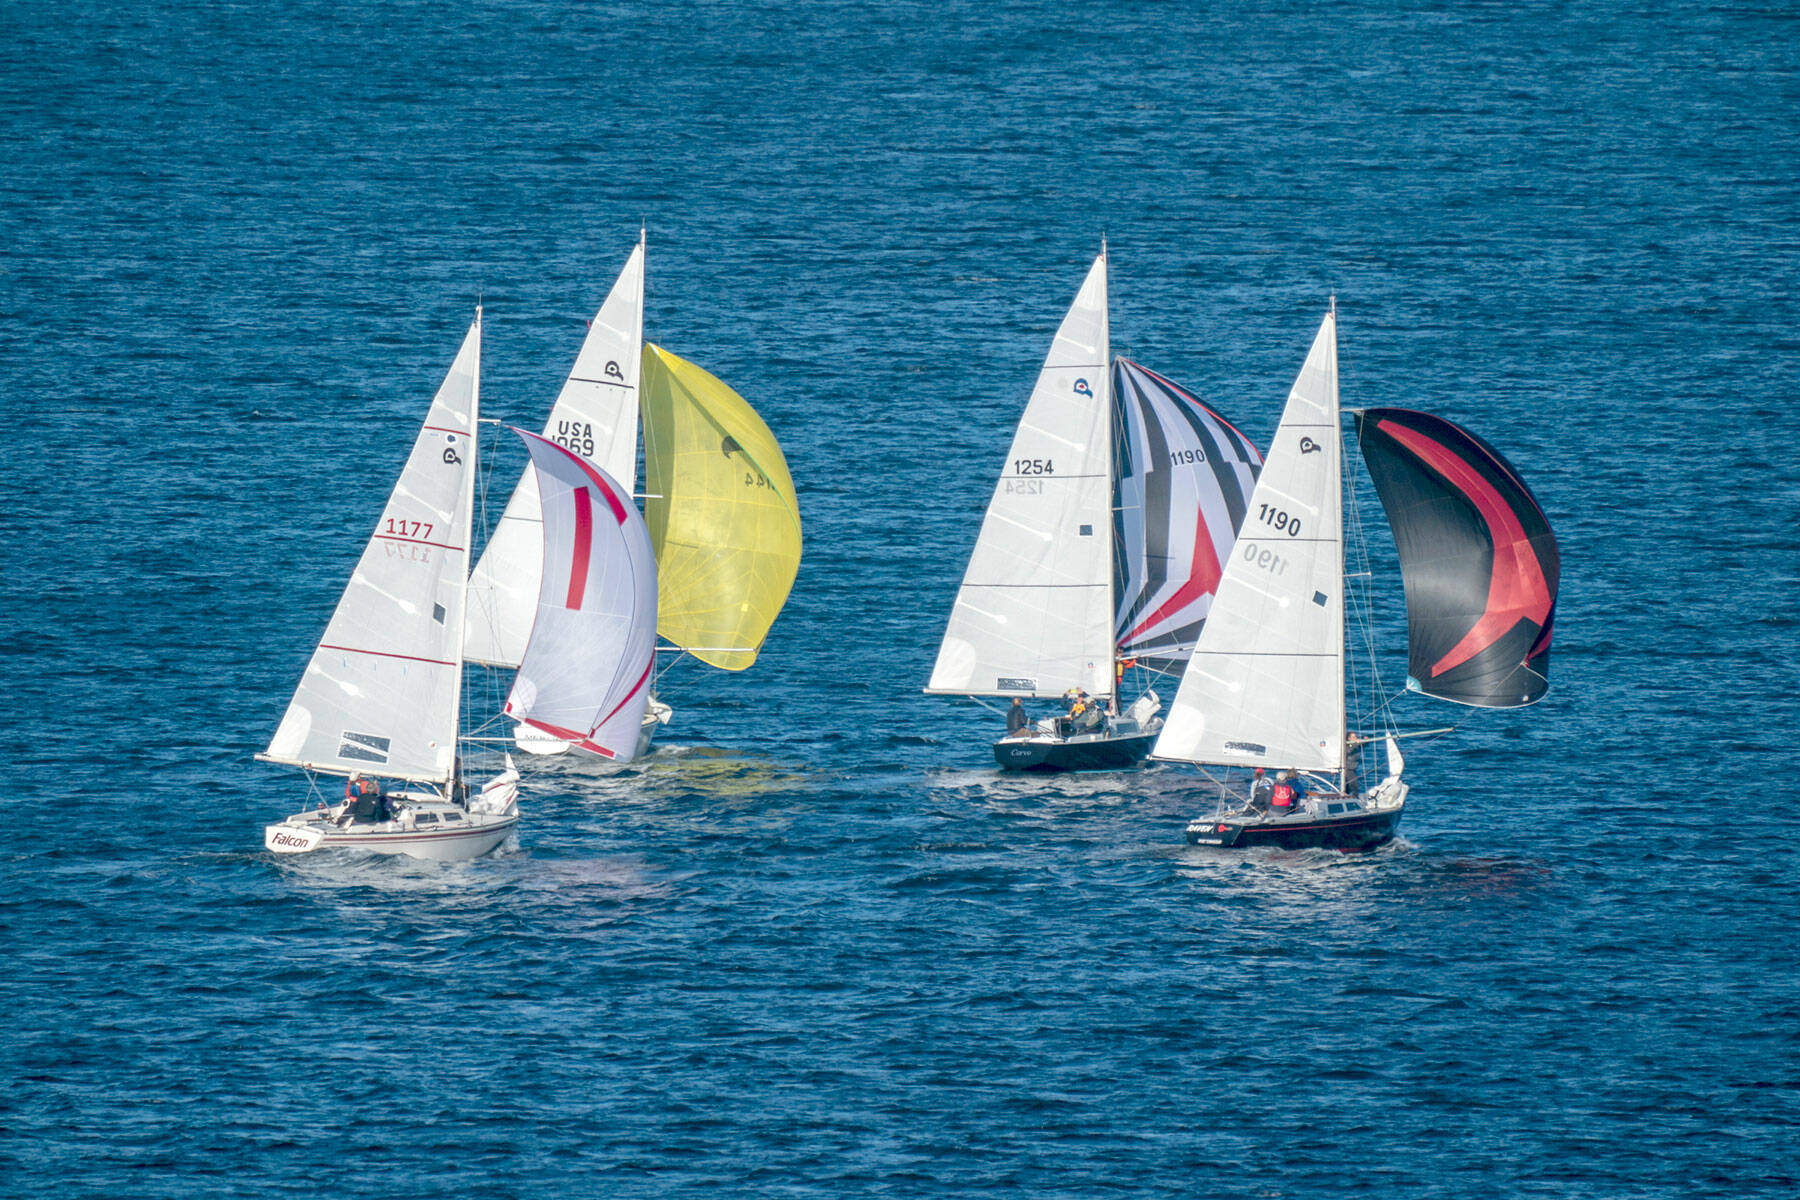 Sailboats engage in racing during the weekly Friday evening event on Port Townsend Bay. (Steve Mullensky/for Peninsula Daily News)